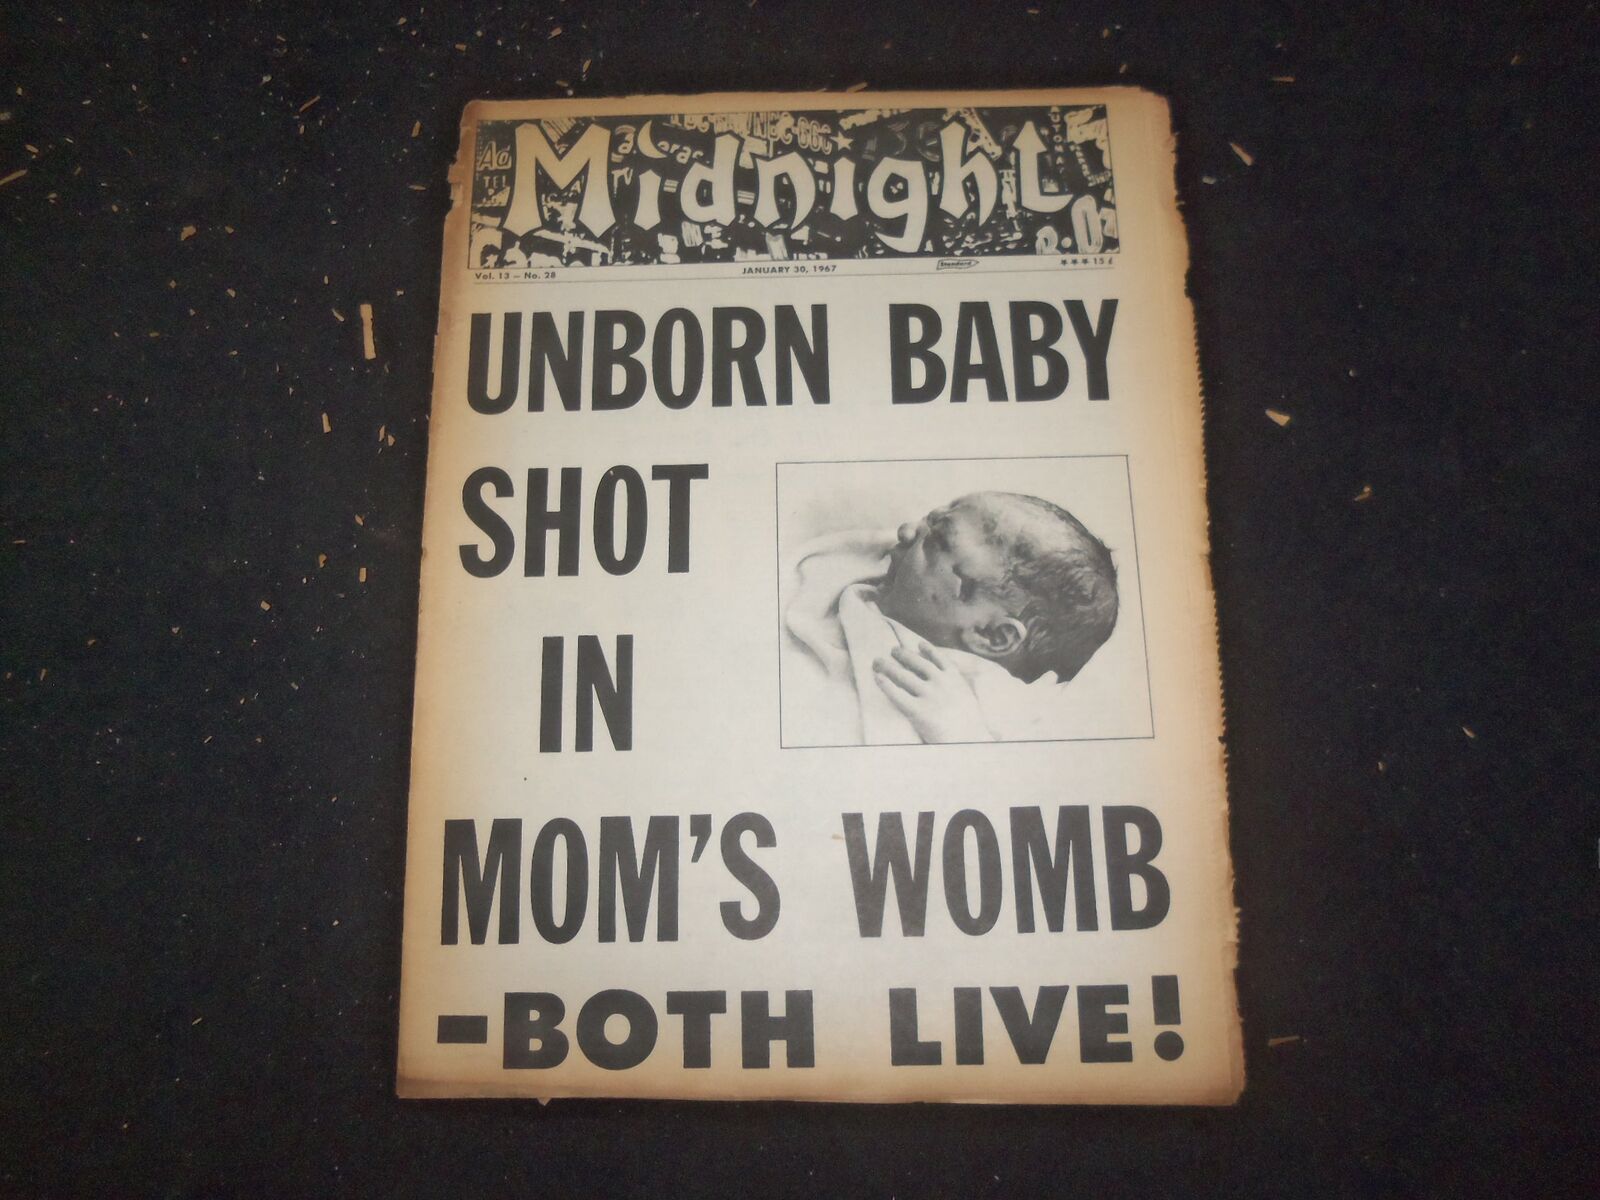 1967 JANUARY 30 MIDNIGHT NEWSPAPER - UNBORN BABY SHOT IN MOM\'S WOMB - NP 7375